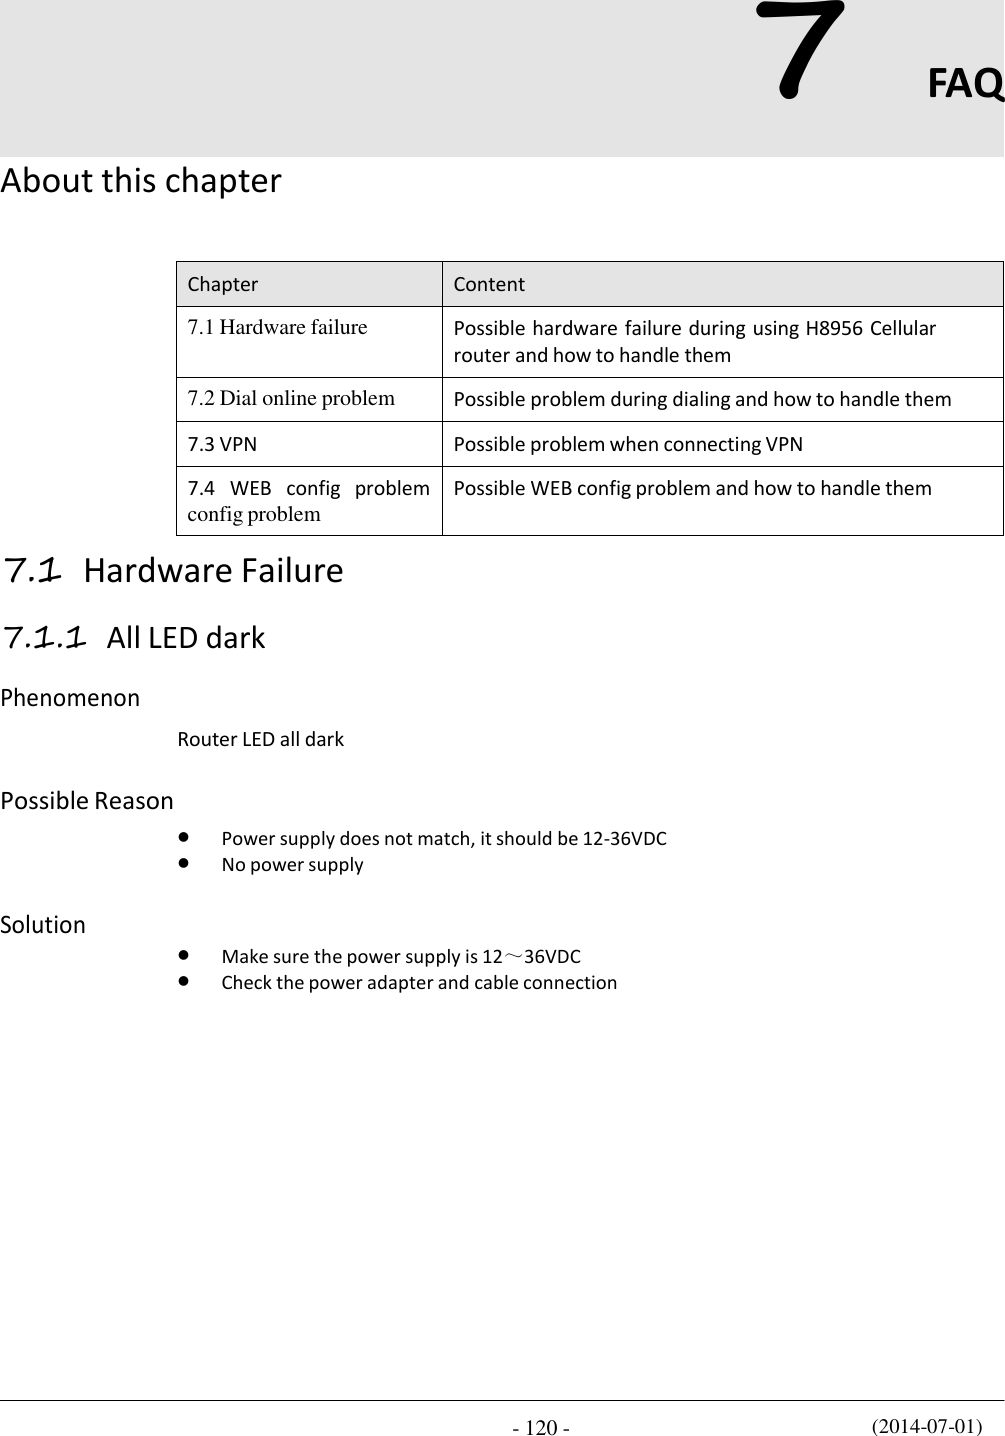 (2014-07-01) - 120 -   7 FAQ  About this chapter    Chapter Content 7.1 Hardware failure Possible hardware failure during using H8956 Cellular router and how to handle them 7.2 Dial online problem Possible problem during dialing and how to handle them 7.3 VPN Possible problem when connecting VPN 7.4   WEB   config   problem config problem Possible WEB config problem and how to handle them 7.1 Hardware Failure  7.1.1 All LED dark  Phenomenon   Router LED all dark  Possible Reason    Power supply does not match, it should be 12-36VDC  No power supply  Solution    Make sure the power supply is 12～36VDC  Check the power adapter and cable connection 